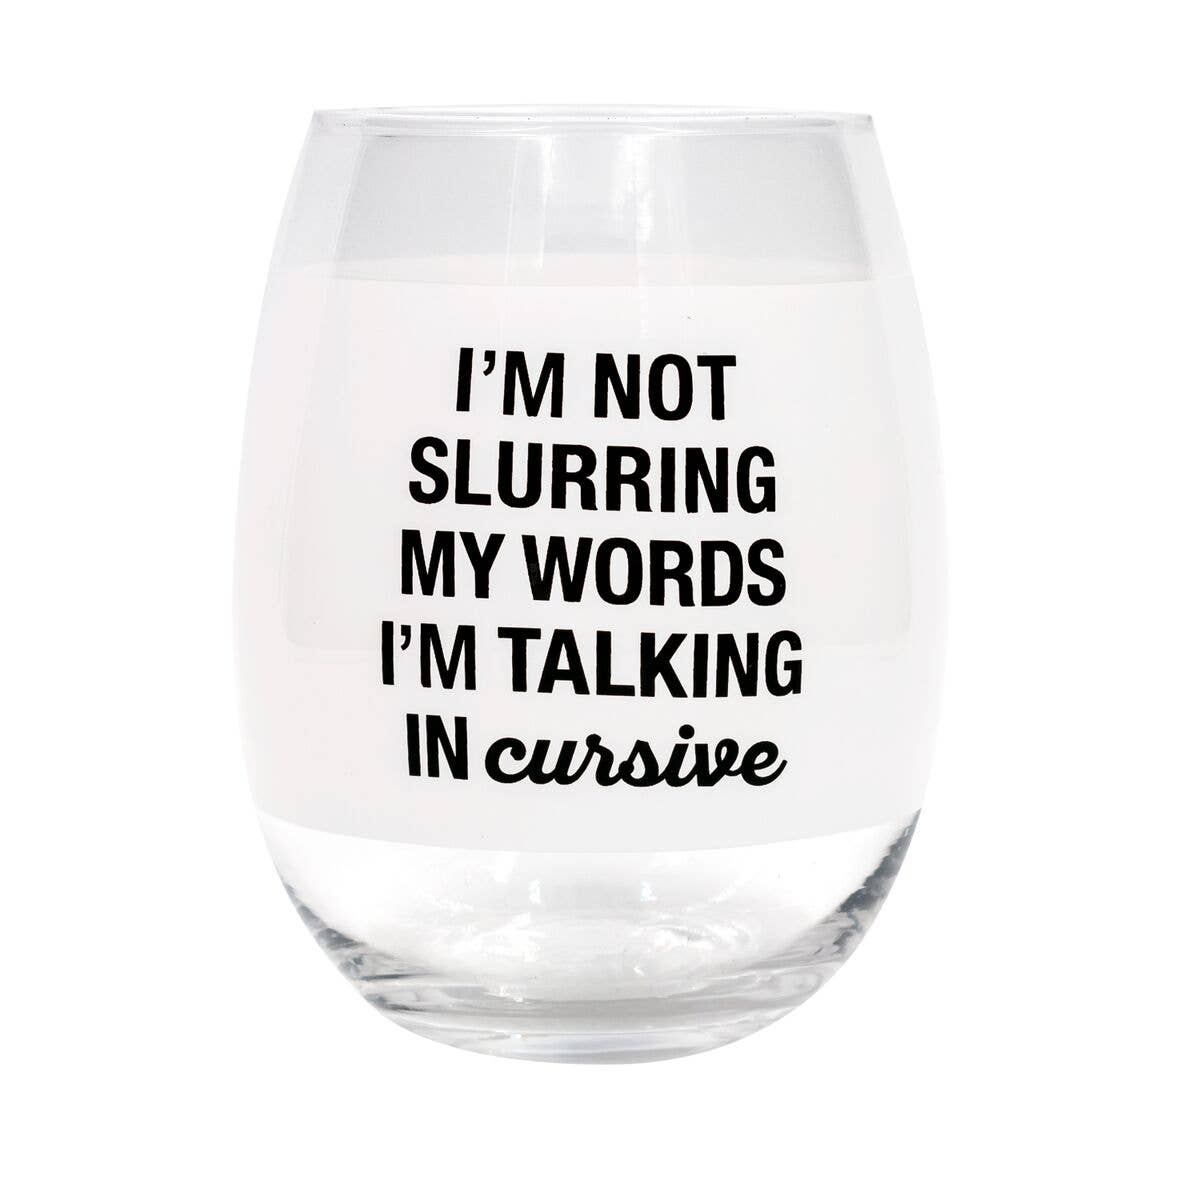 About Face Designs, Inc. Talking in Cursive Stemless Wine Glass